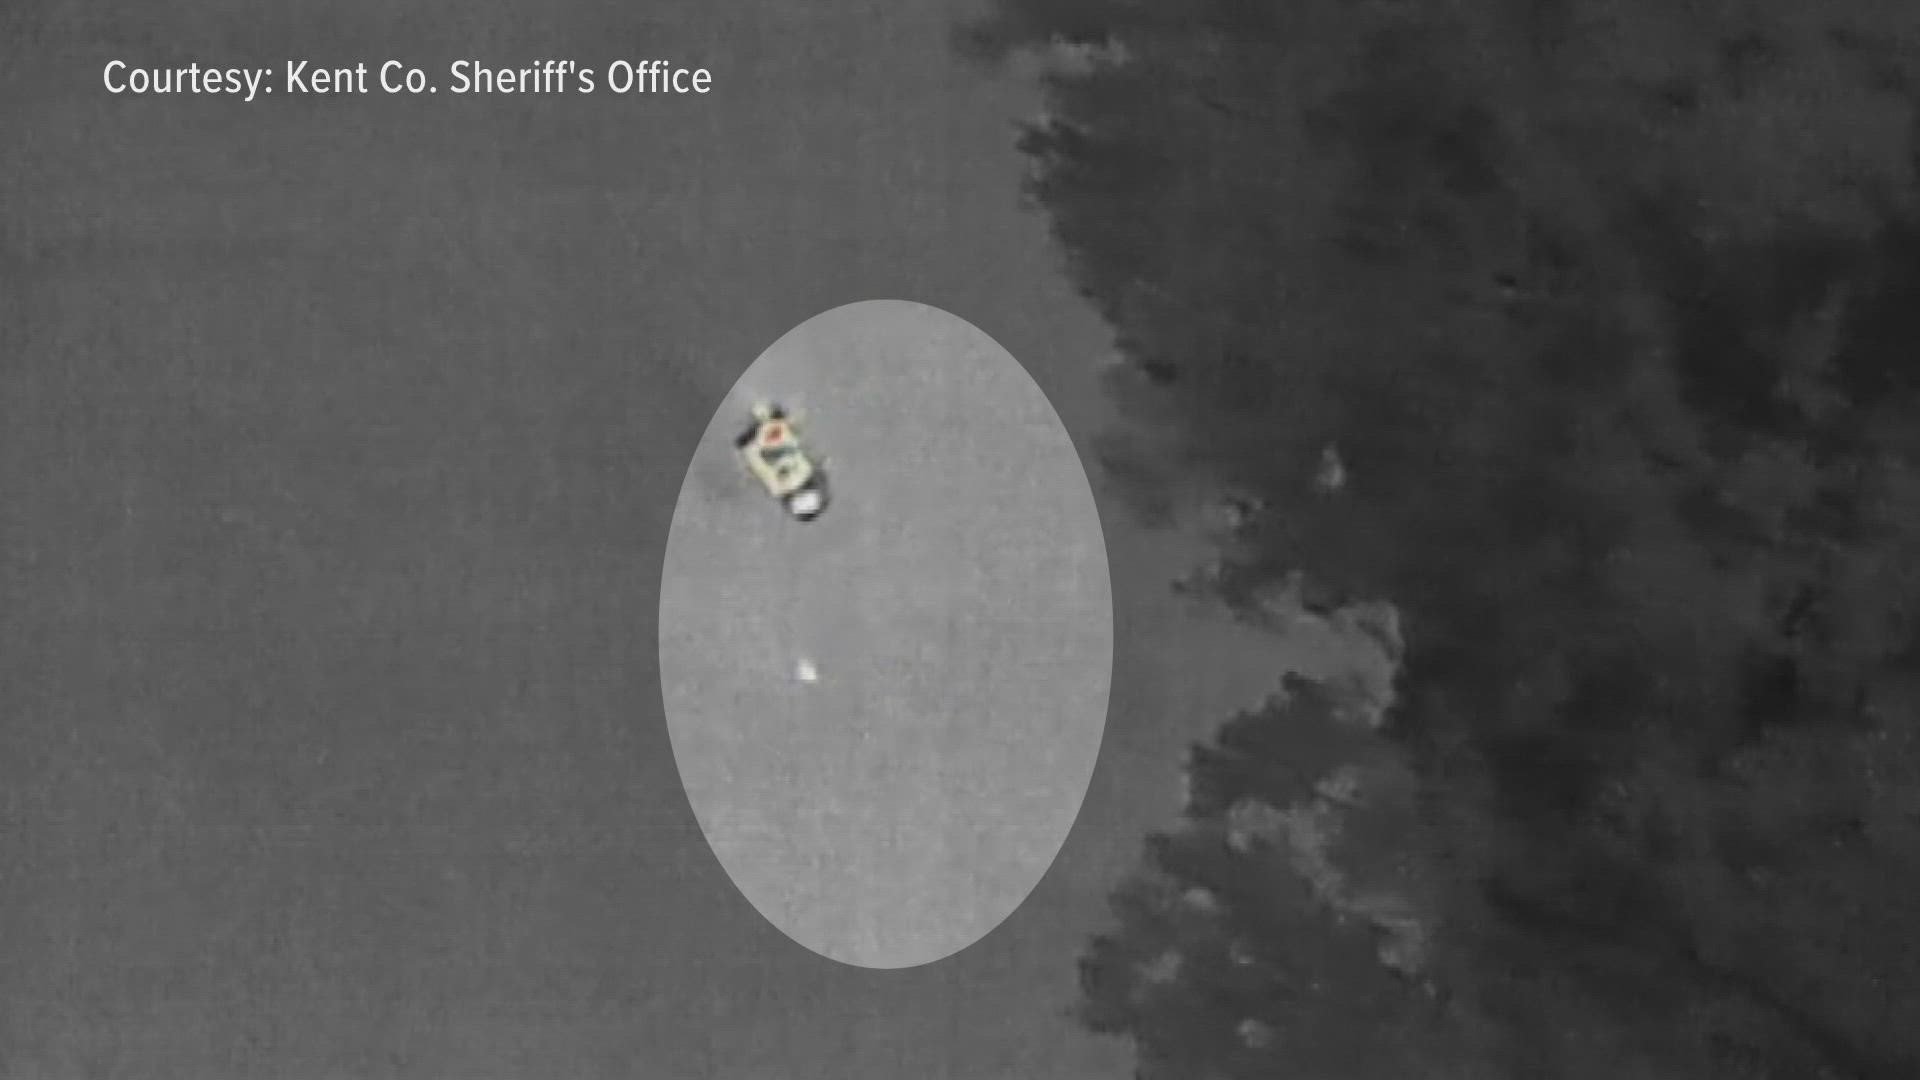 The sheriff's office released drone footage showing how they used thermal imaging to track down one of the suspects.